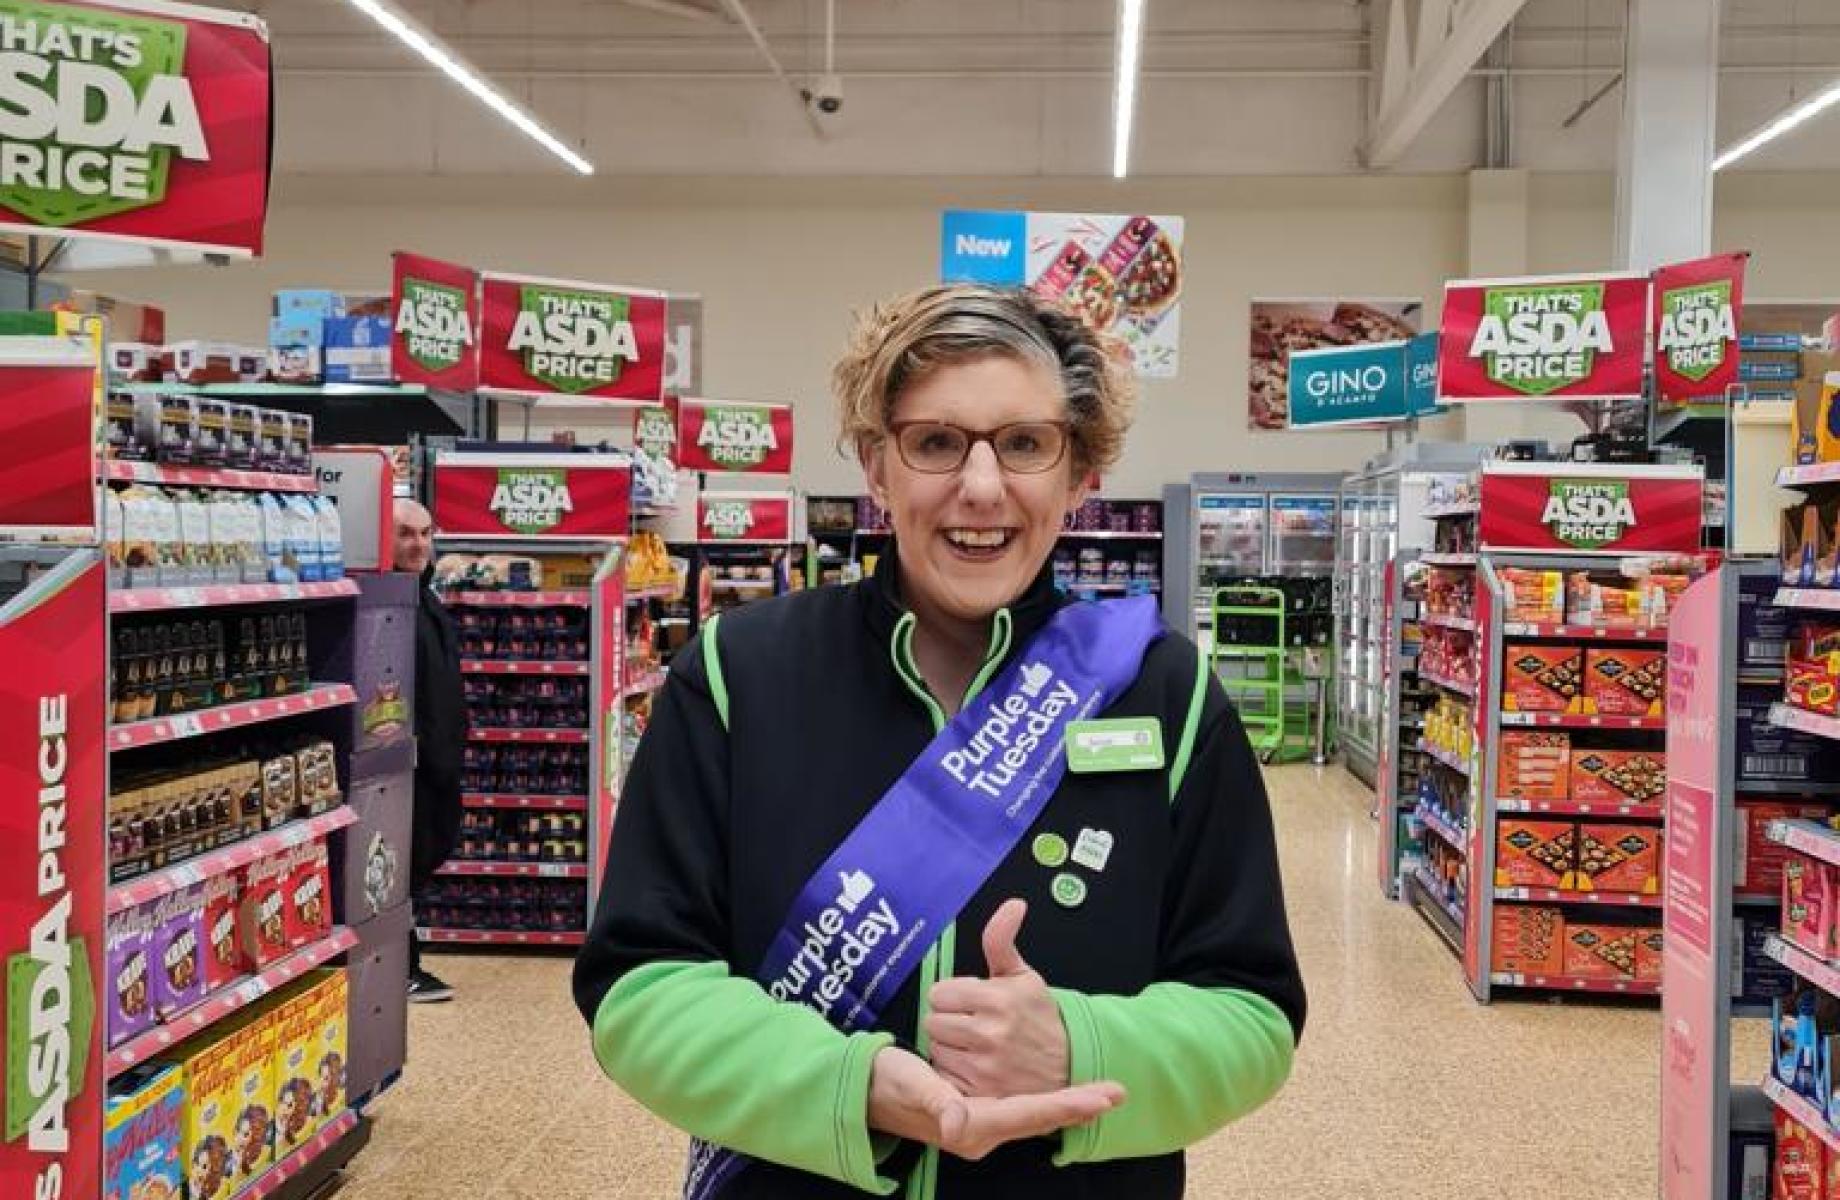 NEWS | Asda rolls out ‘Quieter Hour’ and trains colleagues to better serve customers with additional needs